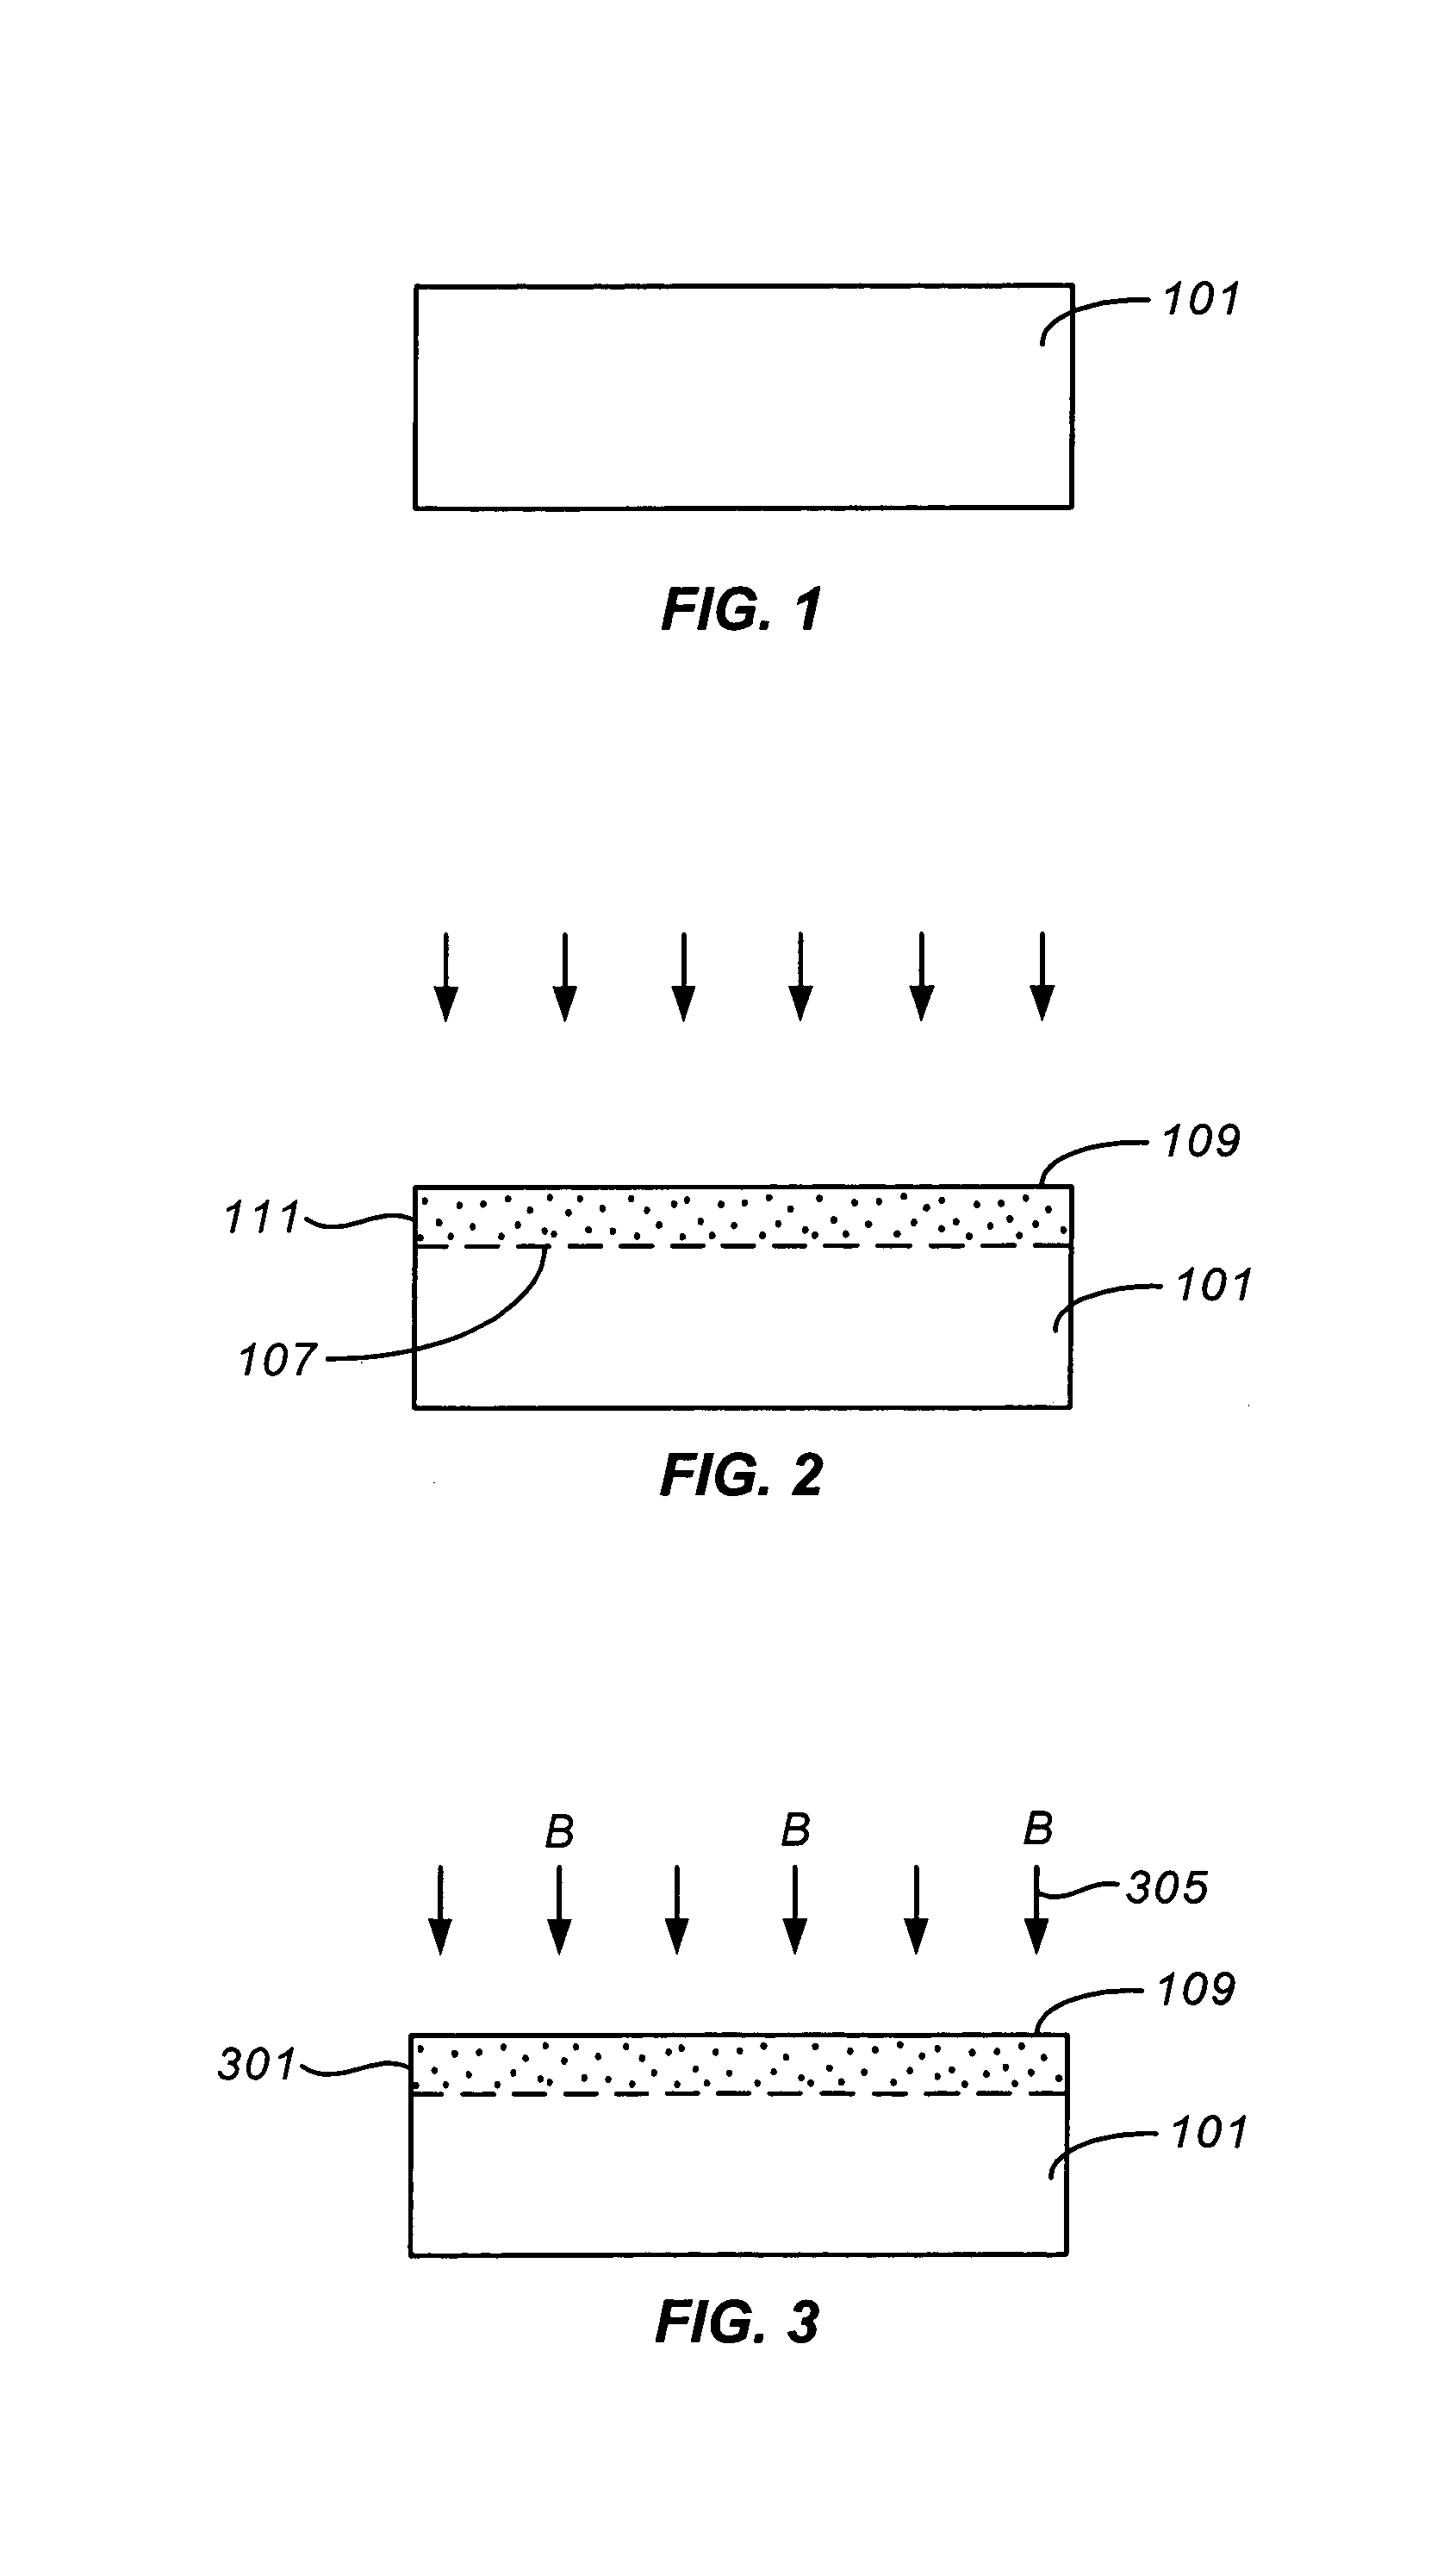 Low energy dose monitoring of implanter using implanted wafers